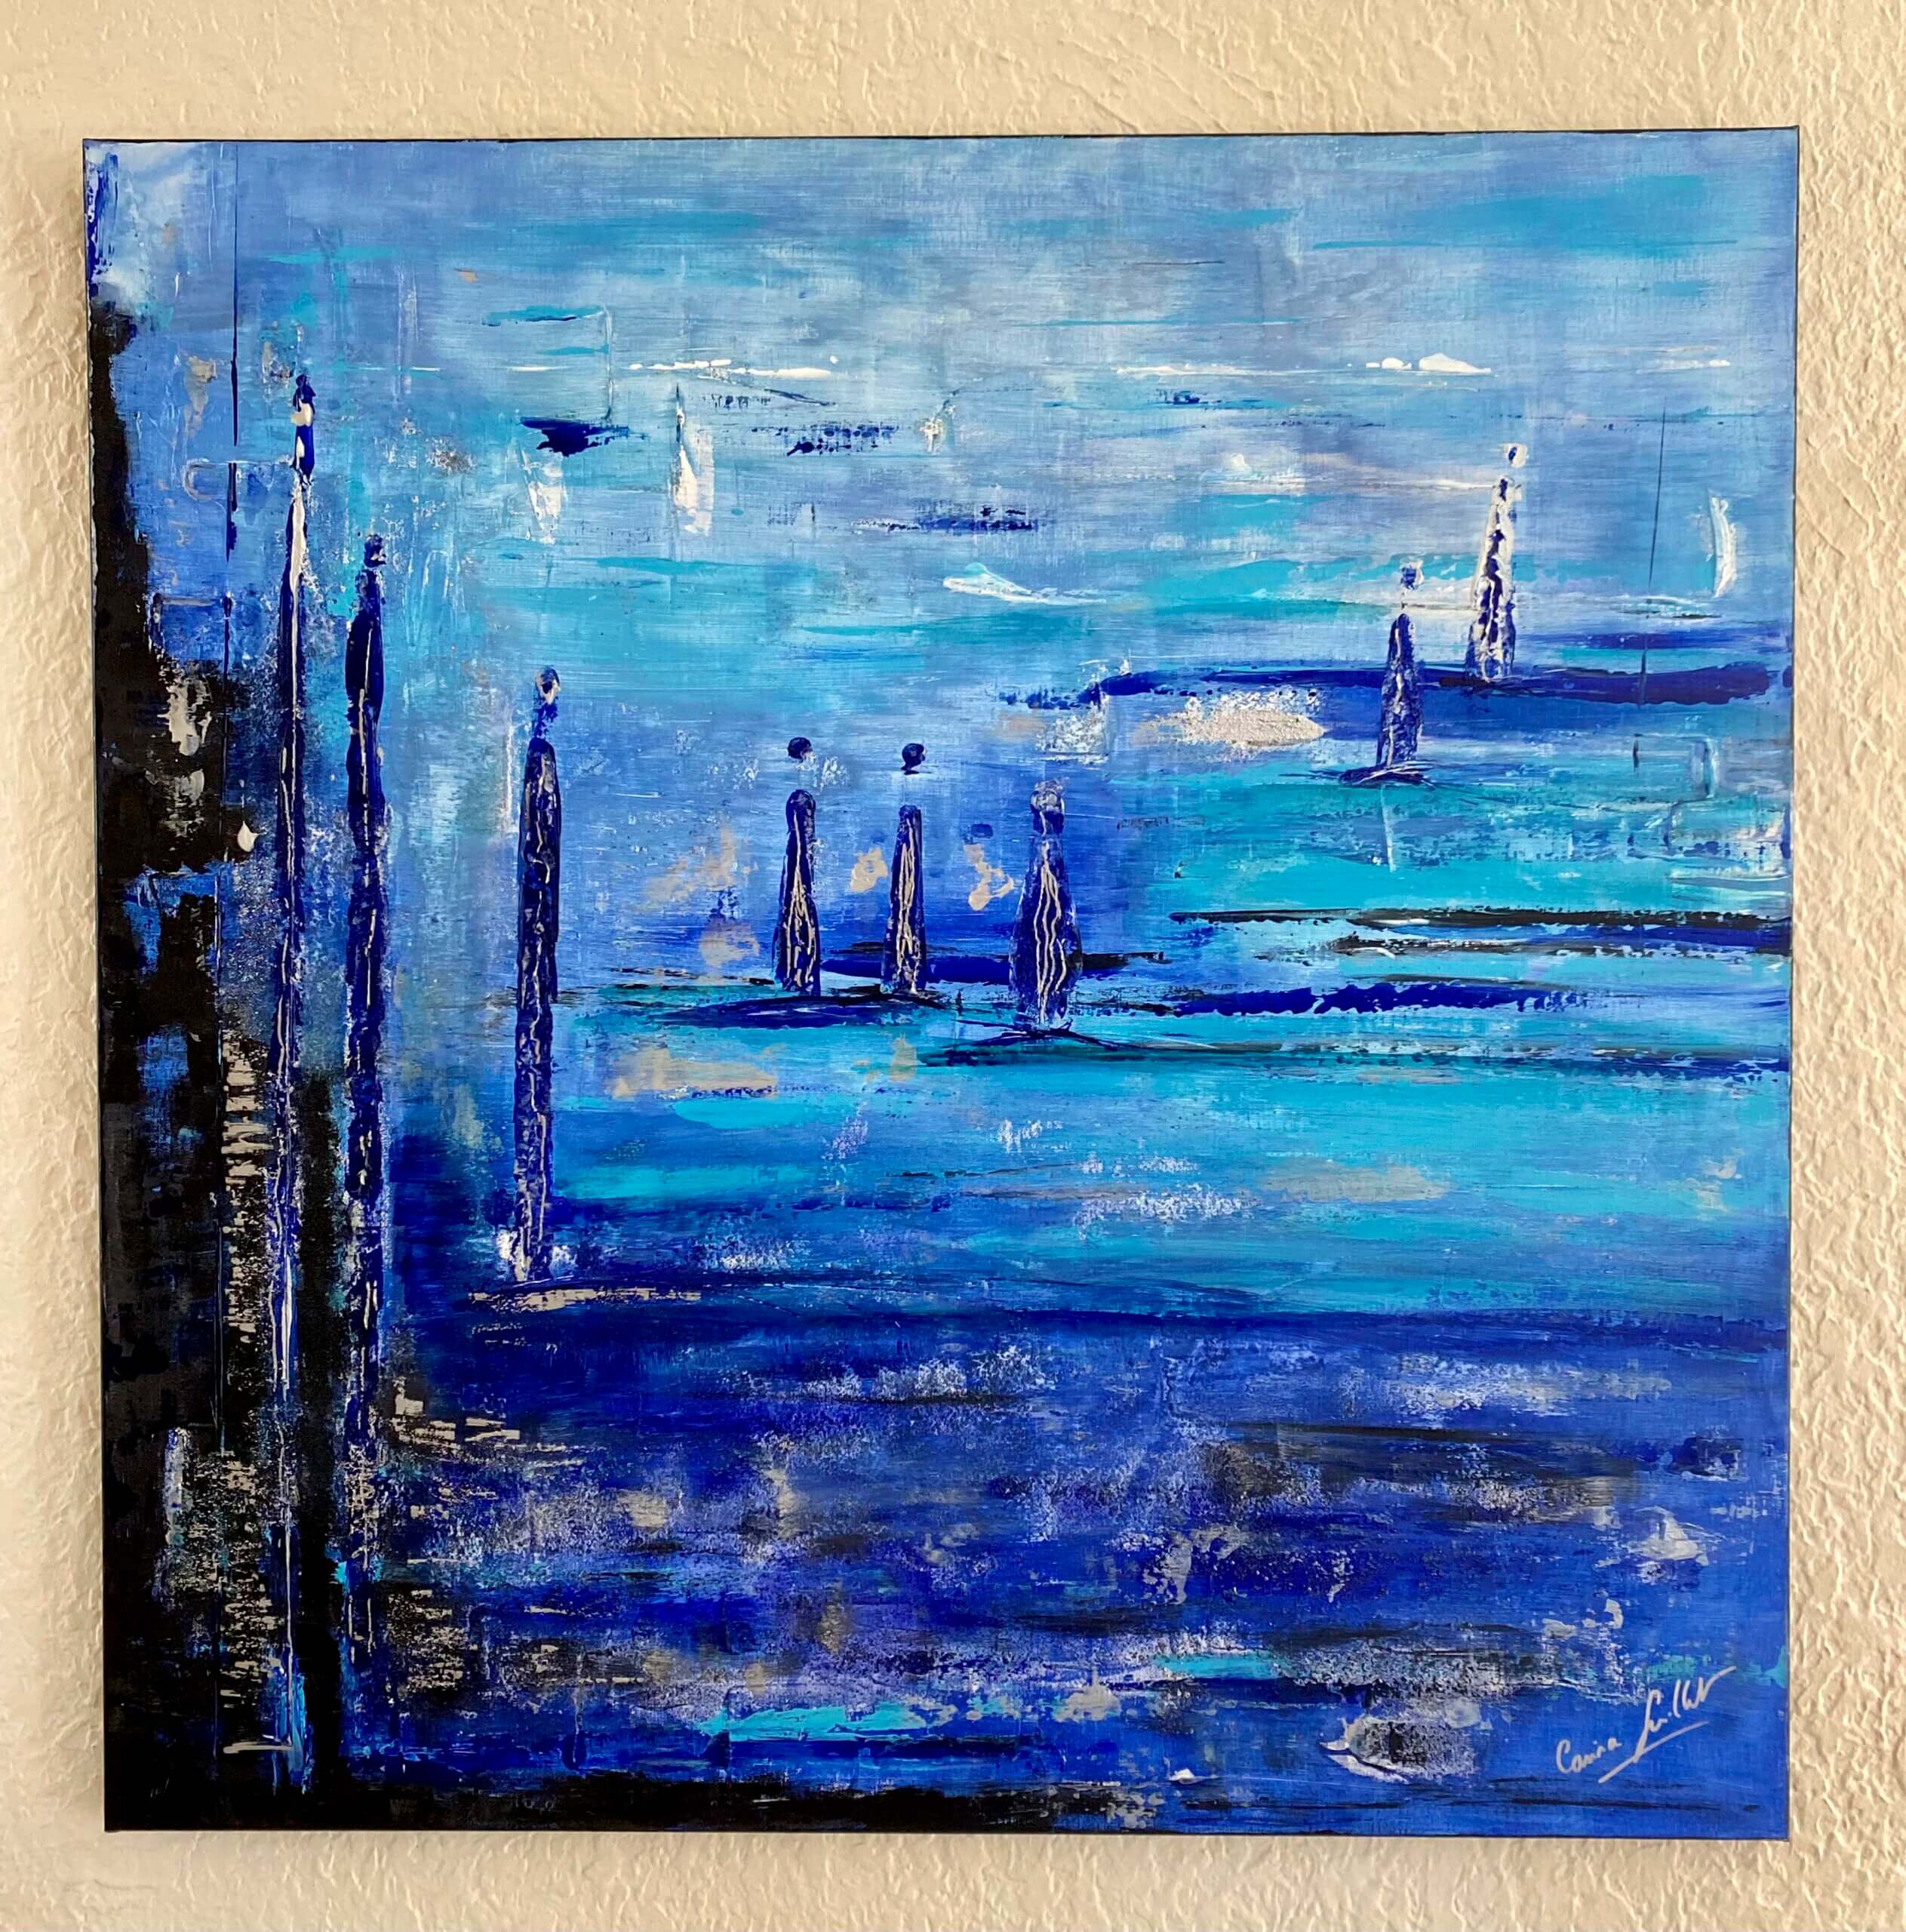 A painting with variant shades of blue